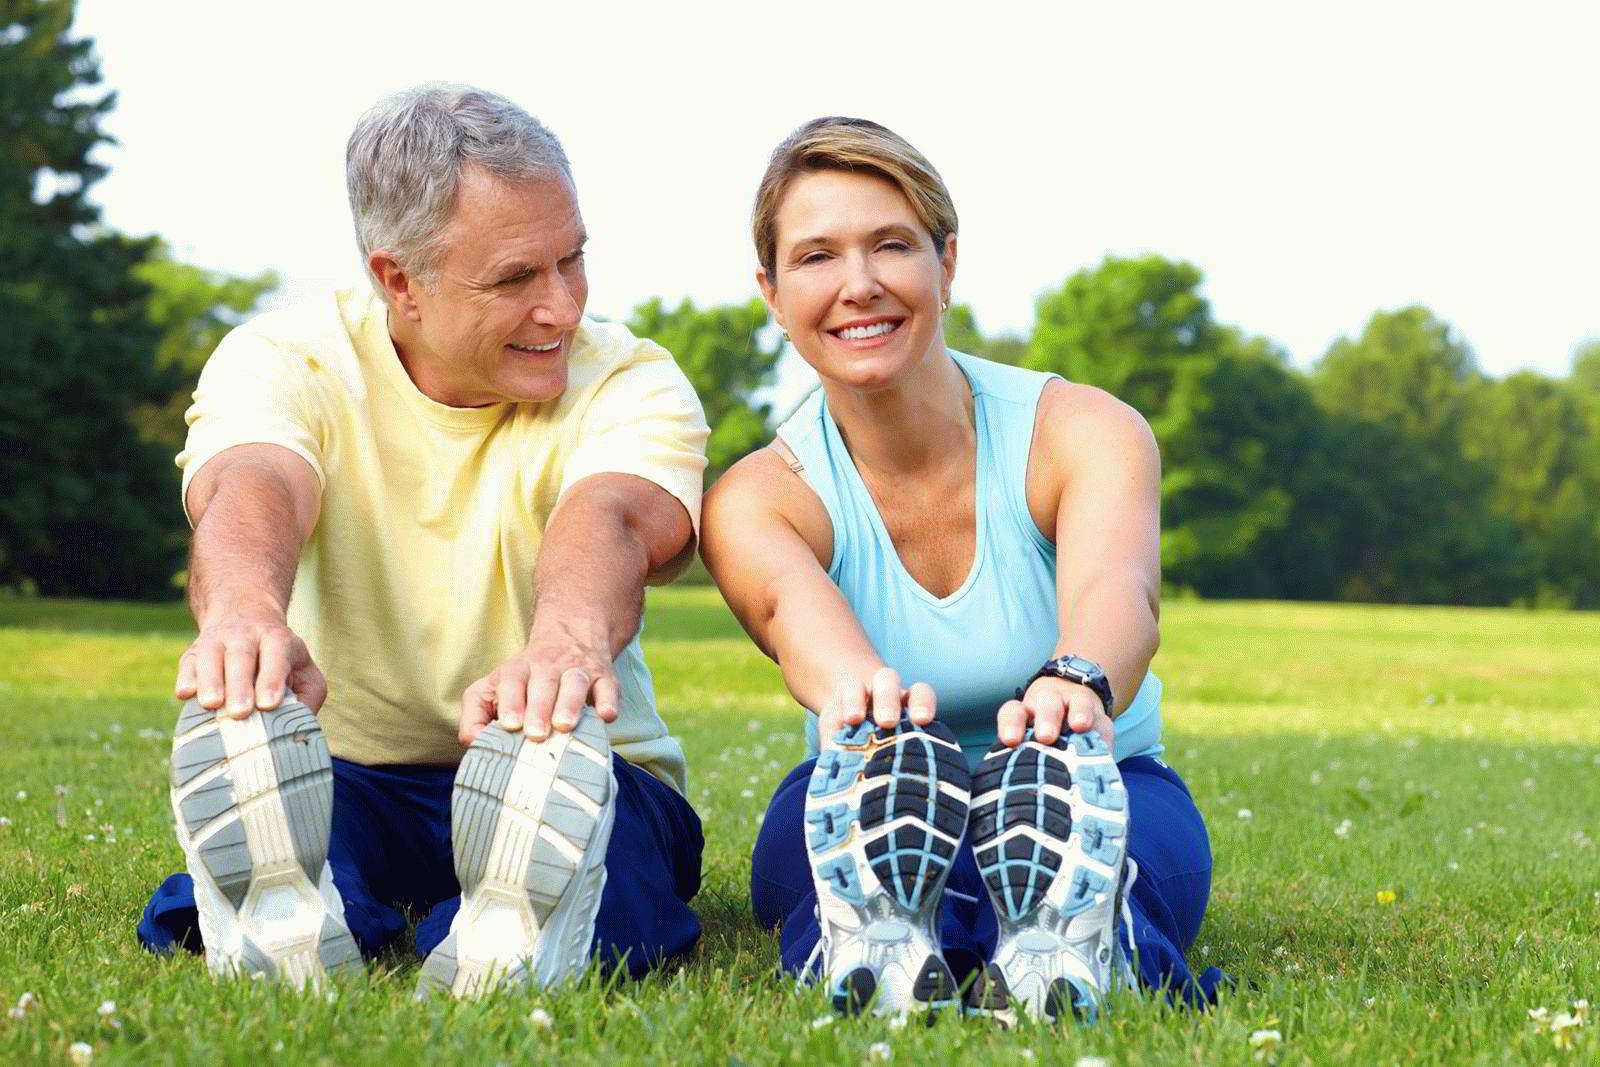 What sports can you do at 40-45 for your health?